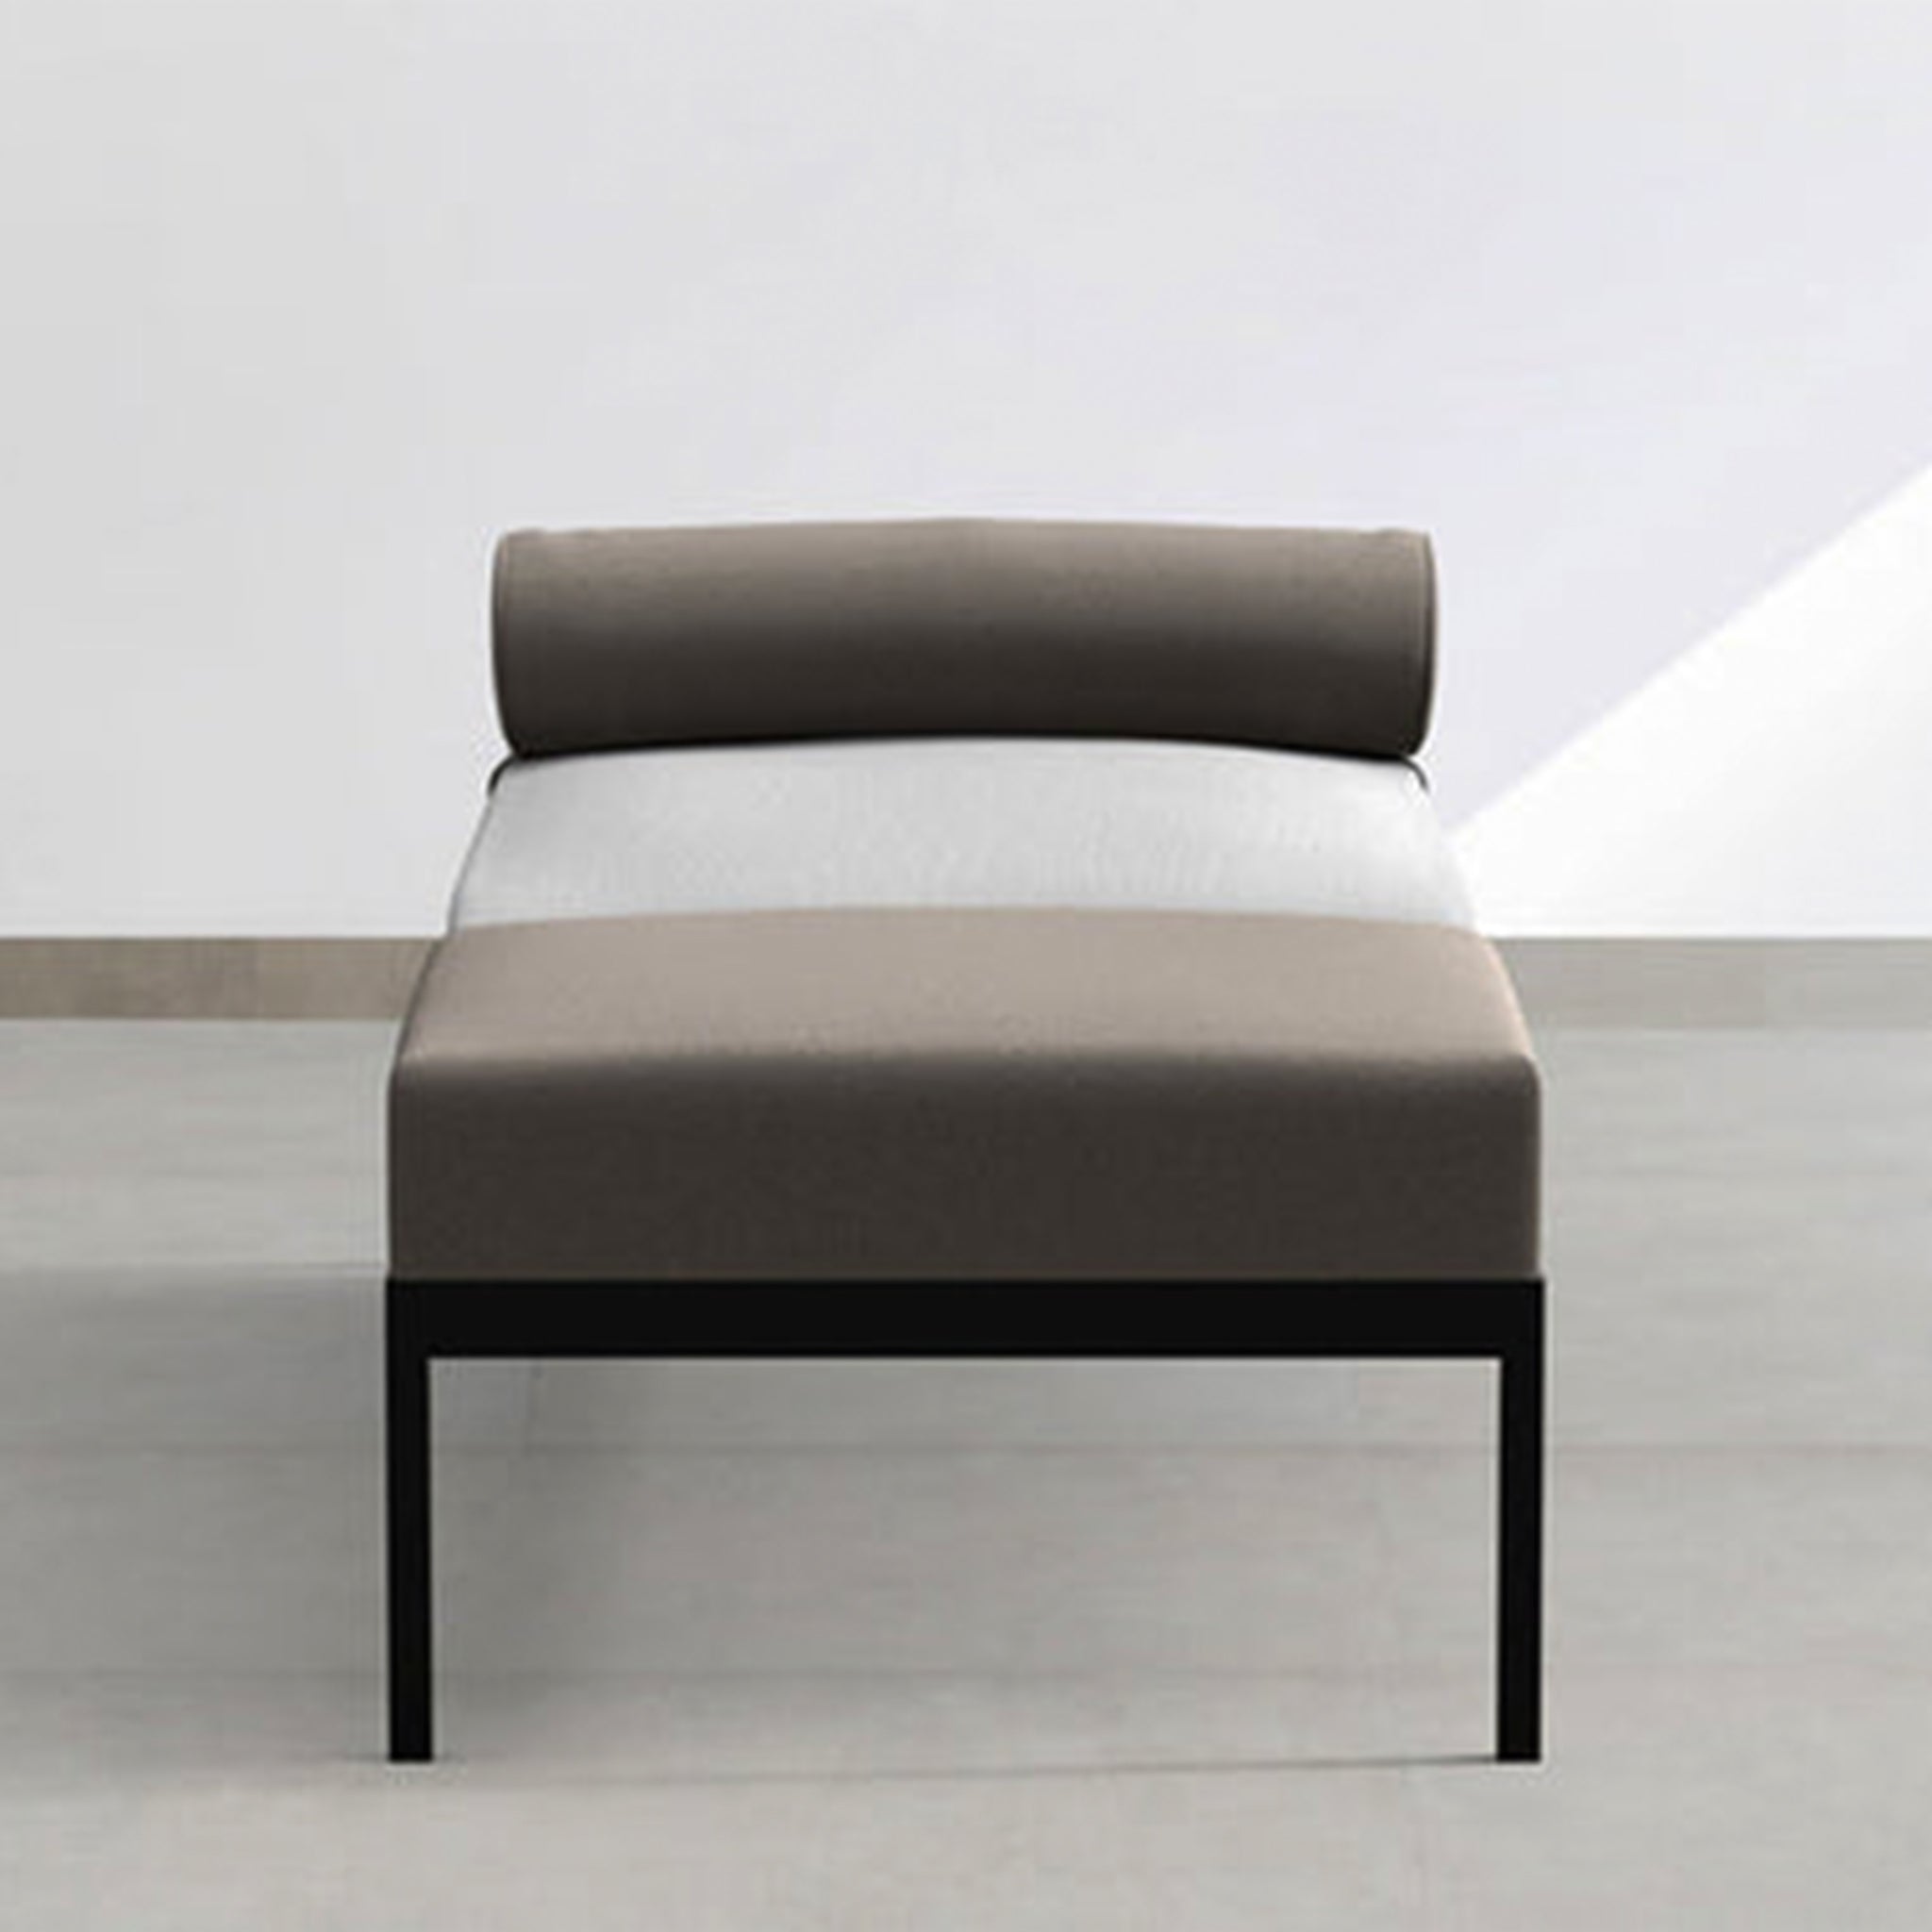 Front view of The Rodman Day Bed showcasing its classic midcentury design, powder-coated steel frame, and low seating. The daybed features two-tone upholstery with a Vegan Leather bolster cushion attached with Velcro.